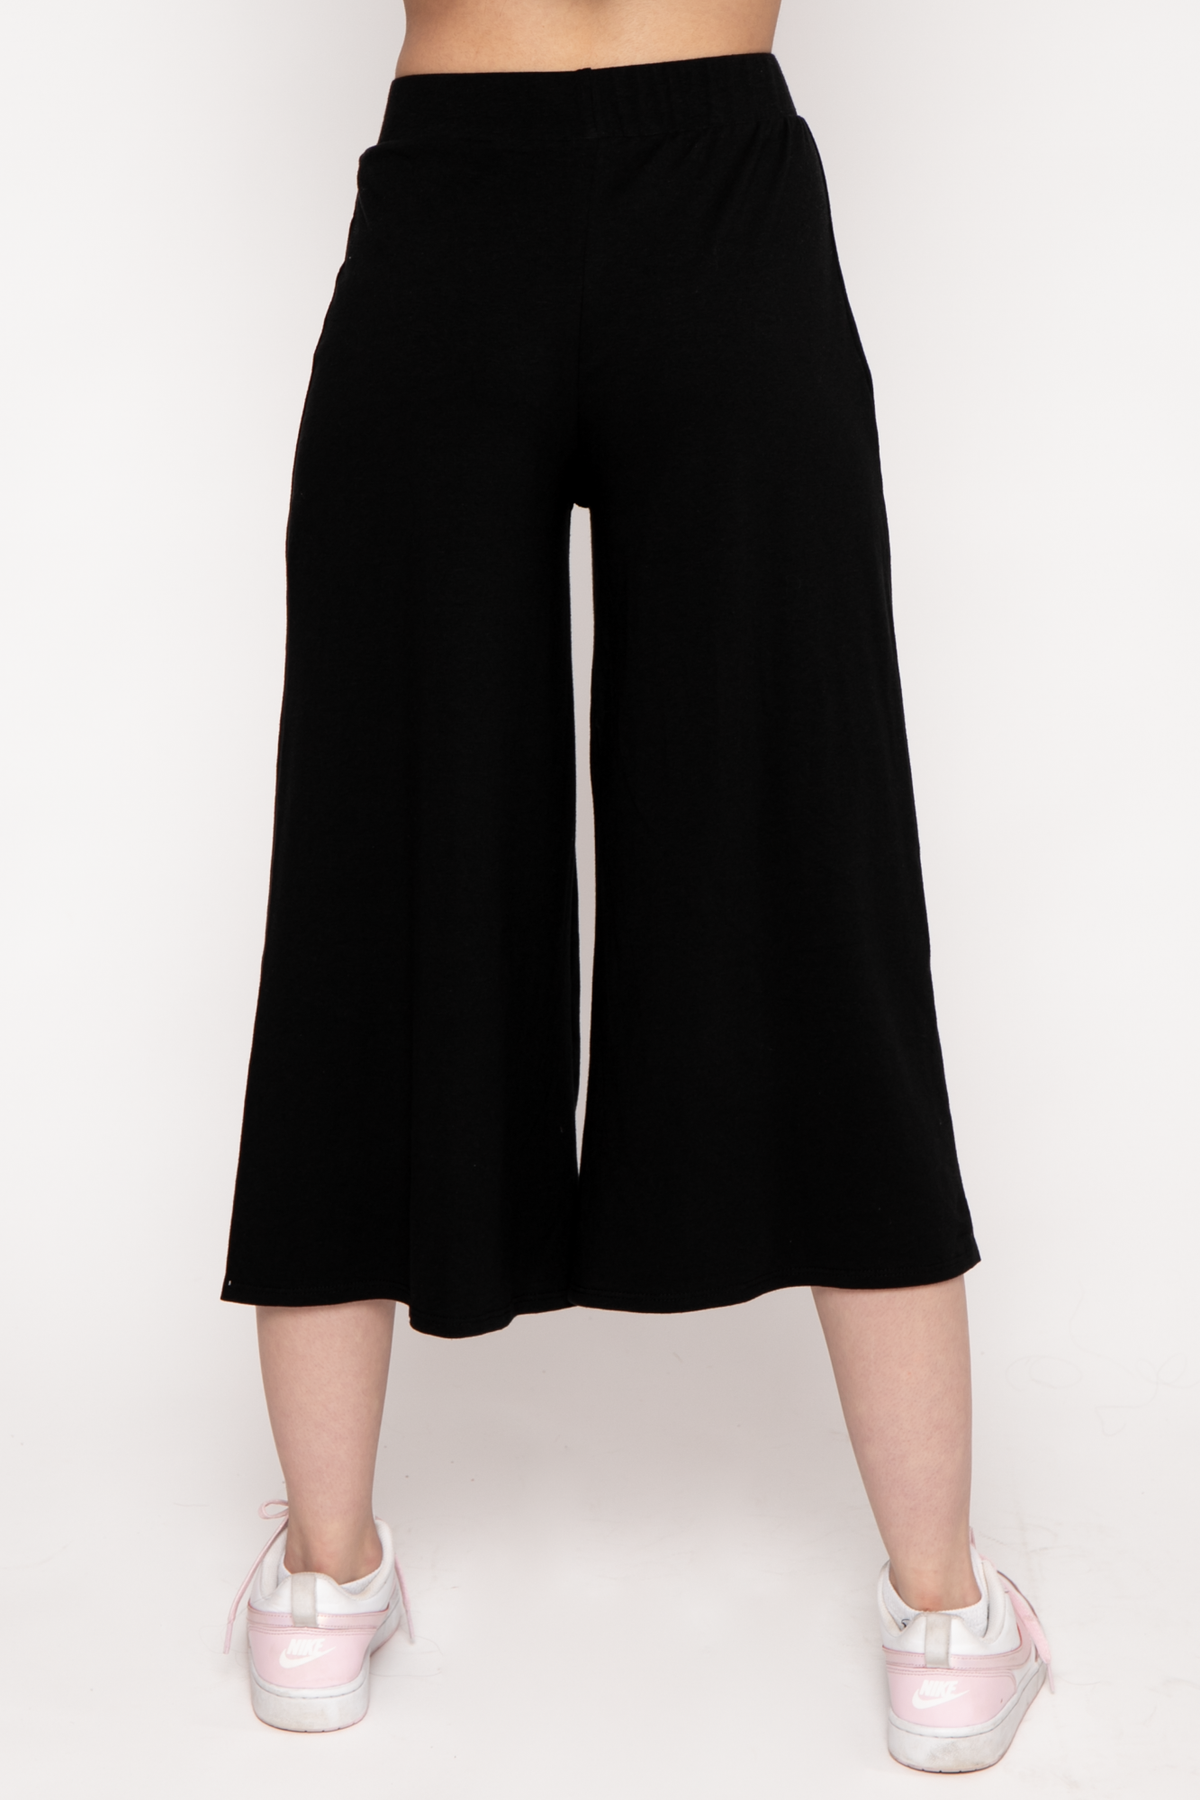 Flash From The Past  - Bobby Jack Gaucho Pants  - Black